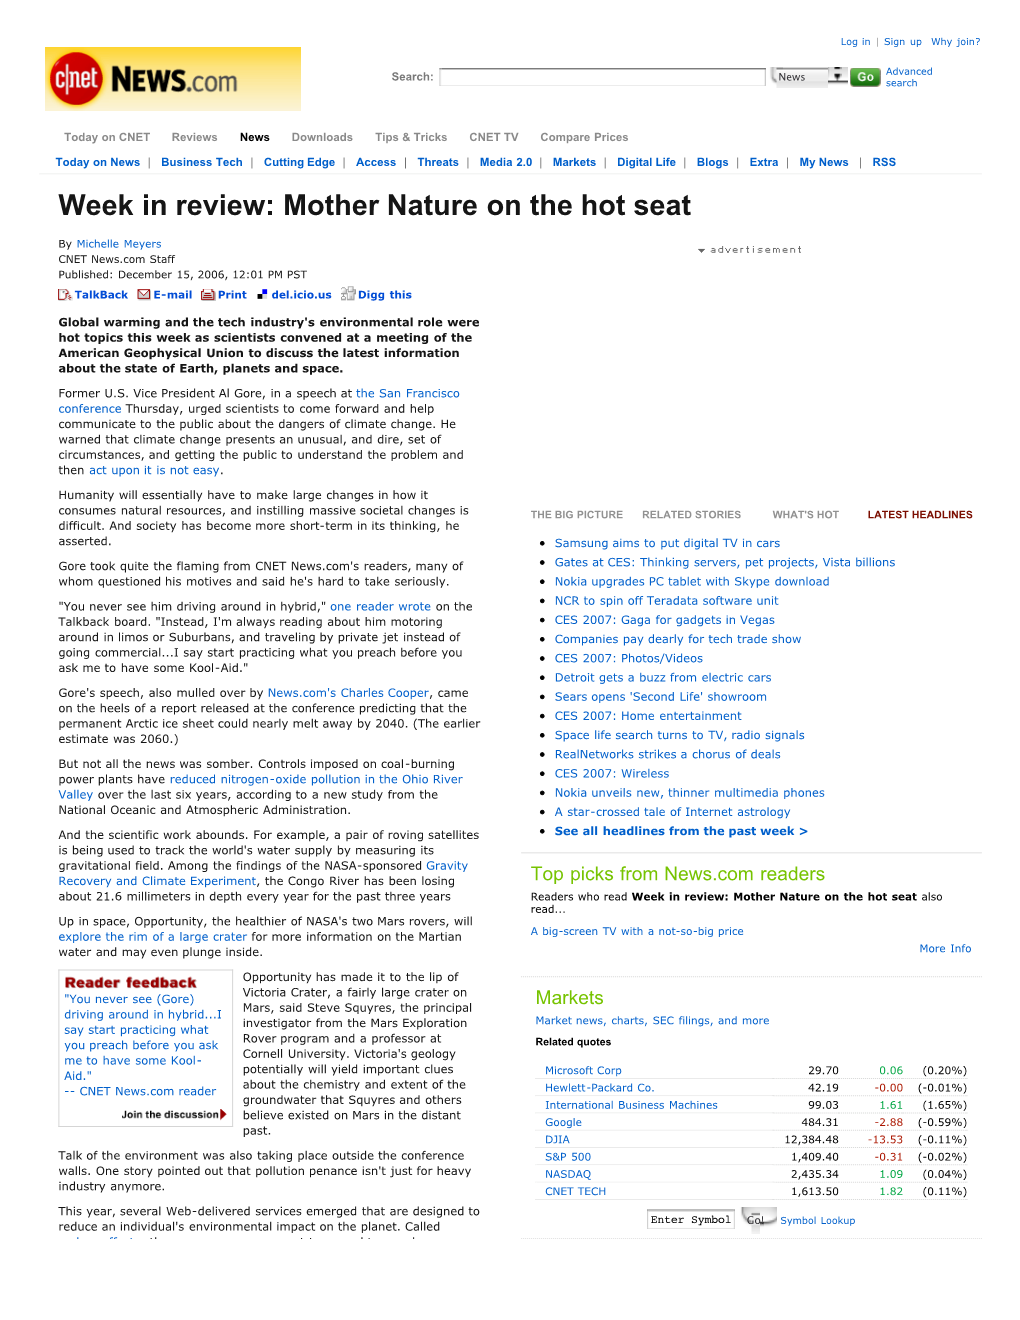 Week in Review: Mother Nature on the Hot Seat